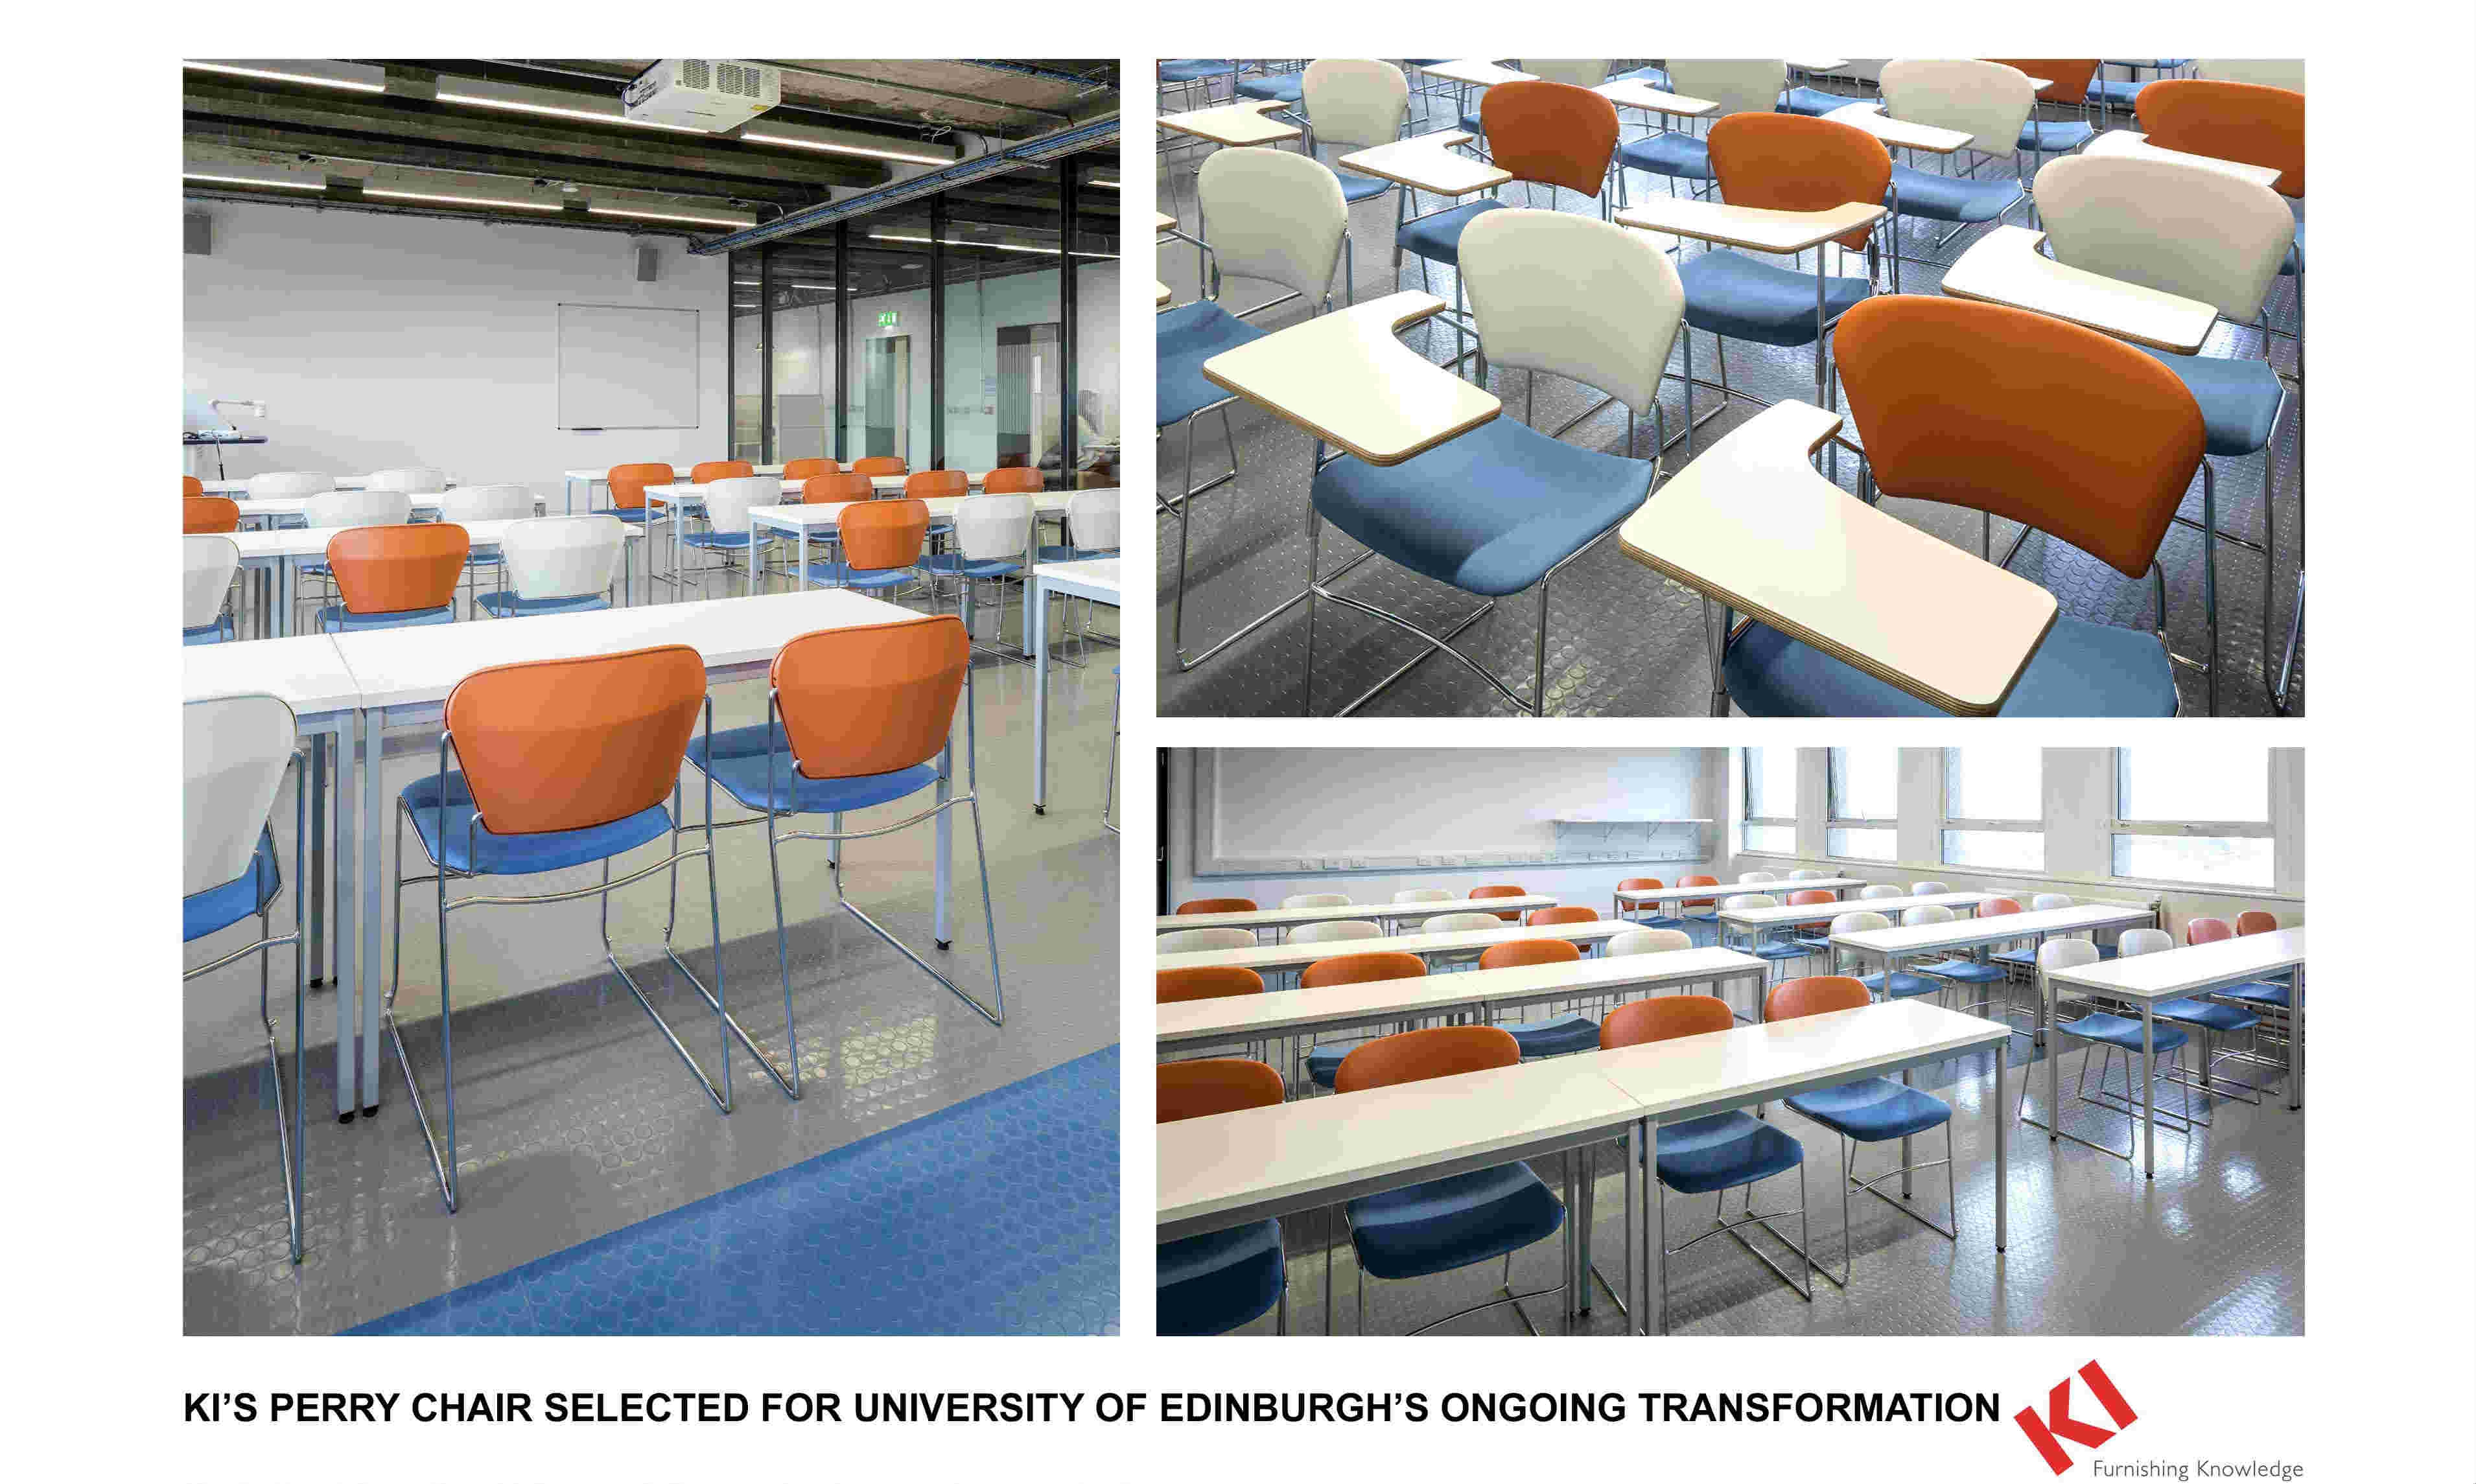 KI’s Perry chair selected for the University of Edinburgh’s ongoing transformation